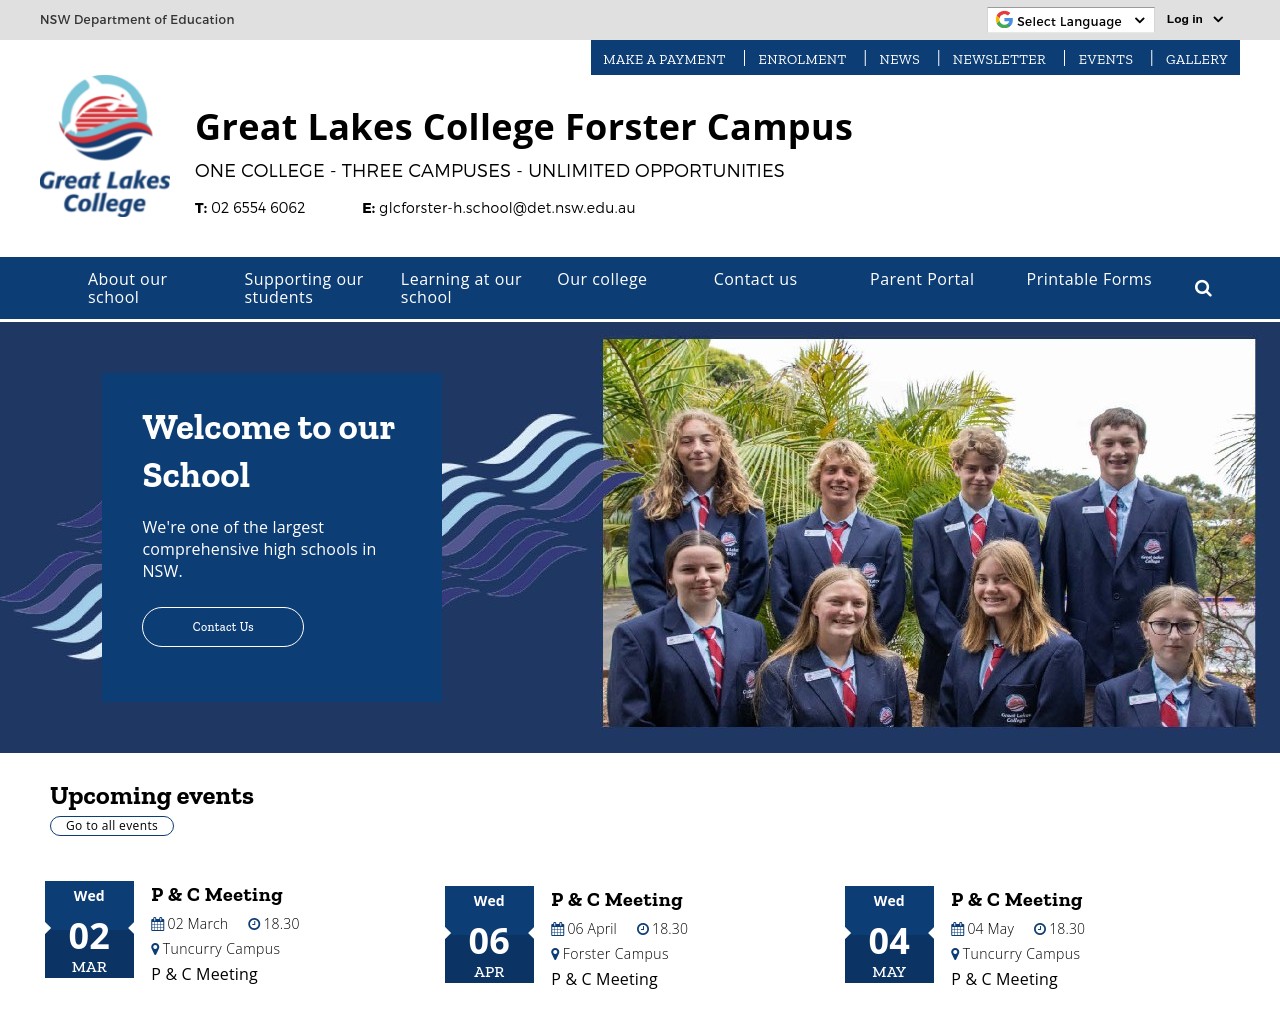 Great Lakes College Forster Campus